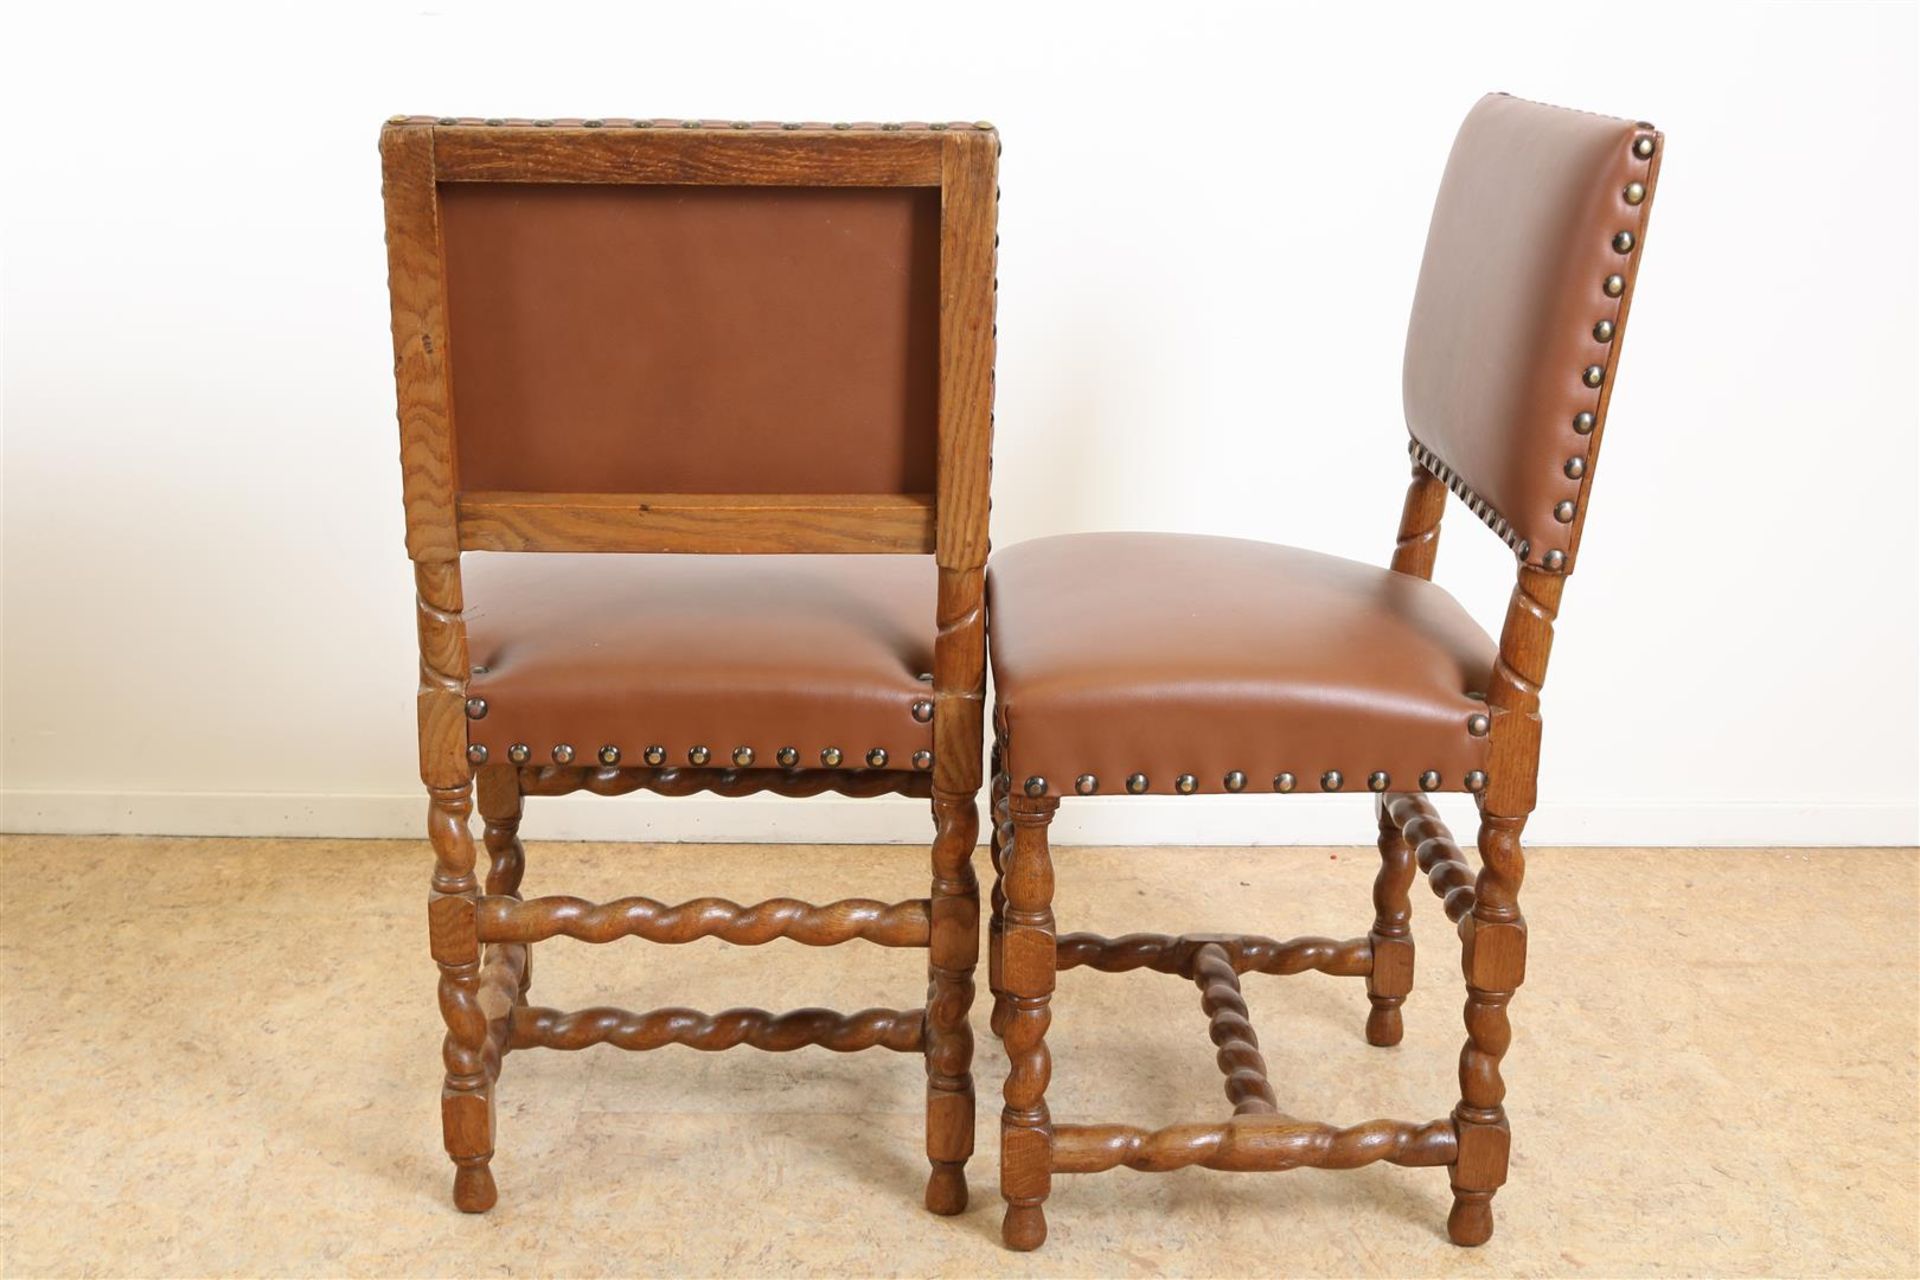 Series of 4 oak Renaissance-style chairs upholstered in brown leather. - Image 6 of 6